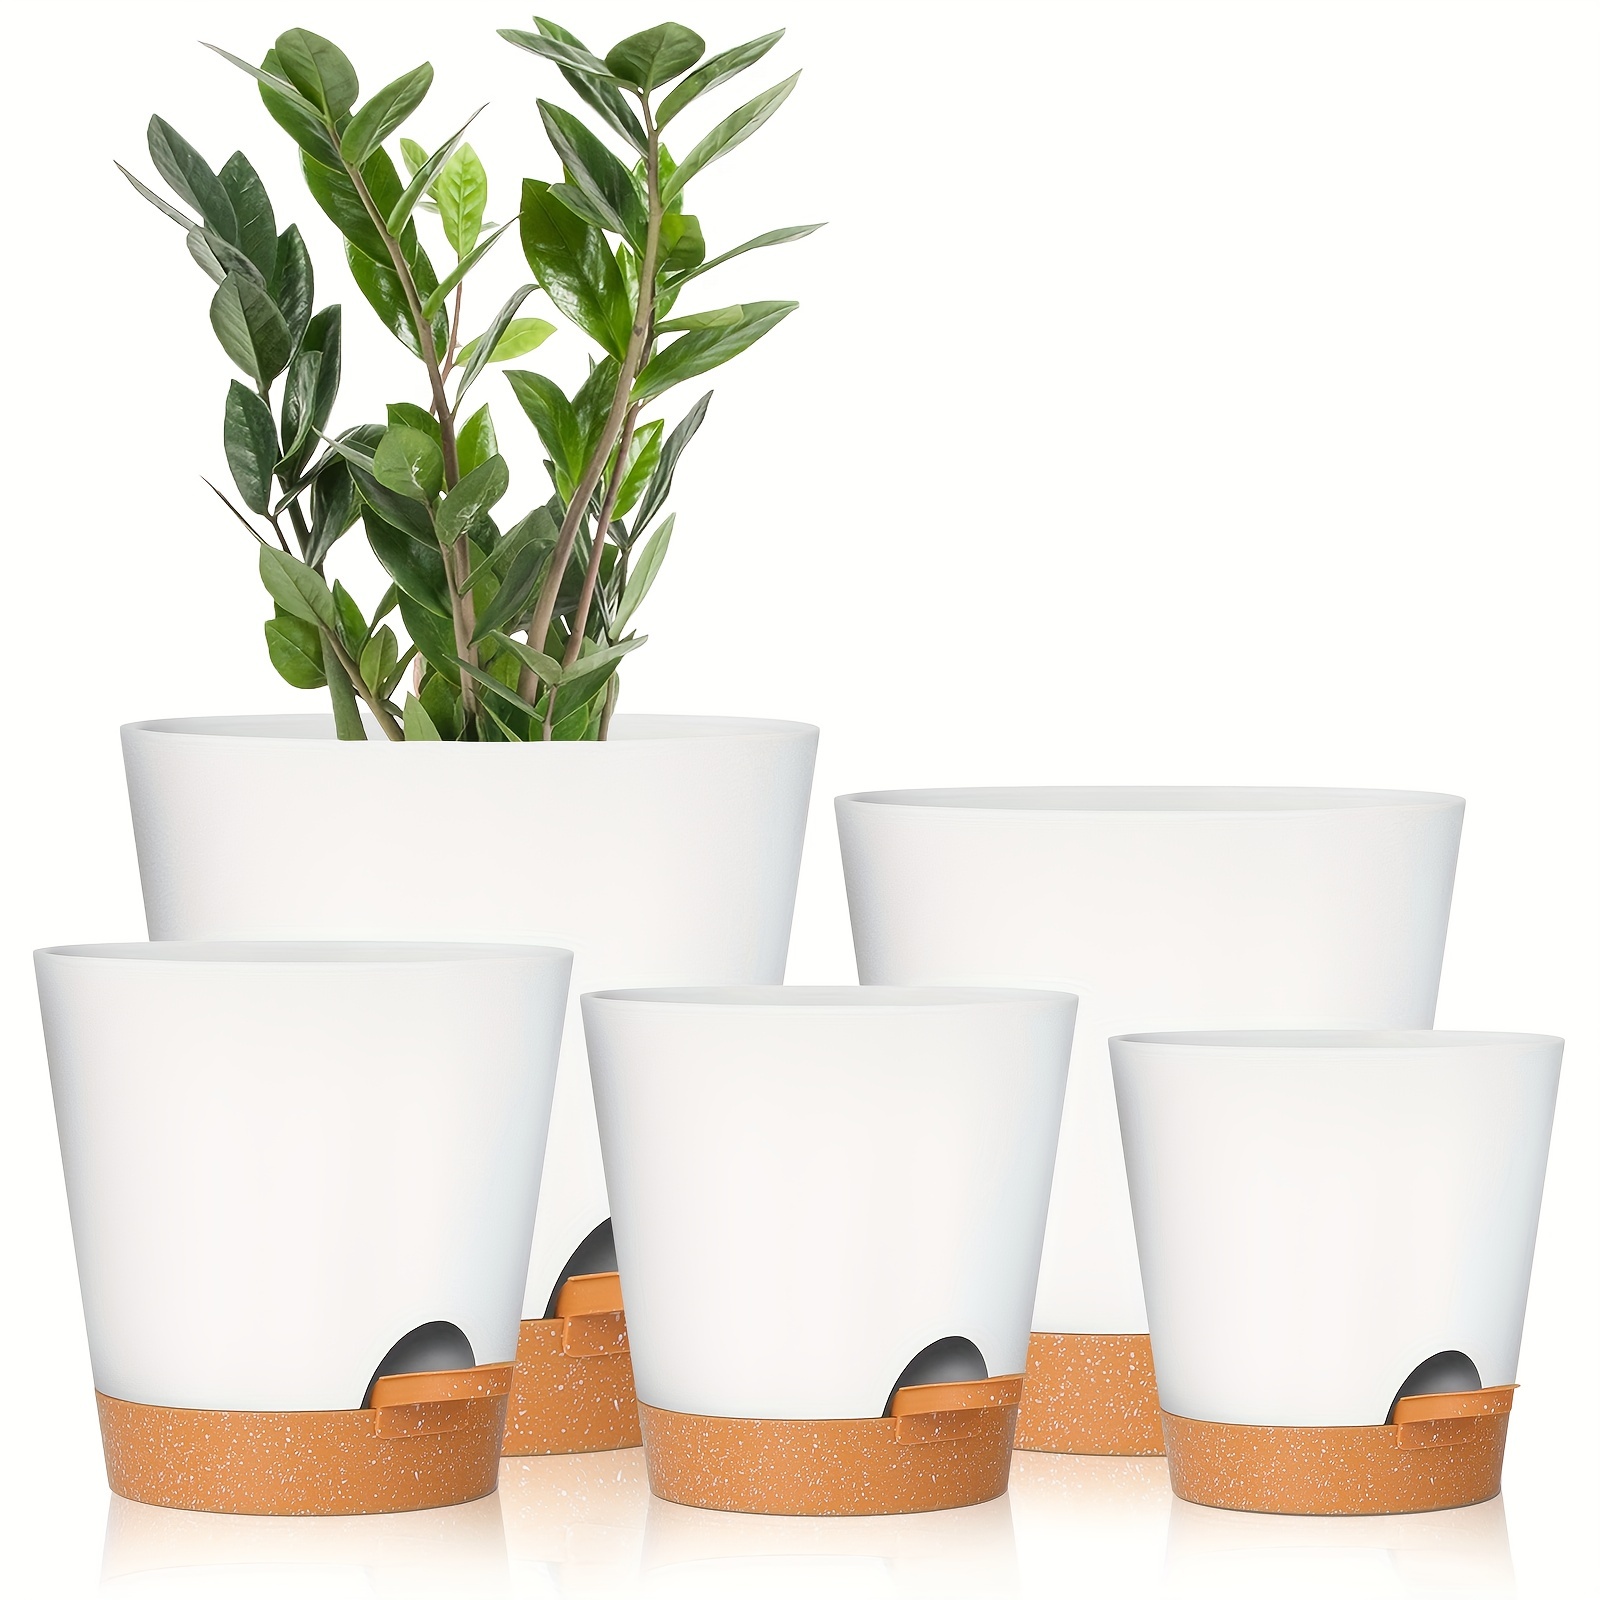 

Gardife (5pcs) Plant Pots 7/6.5/6/5.5/5 Inch Self Watering Planters With Drainage Hole, Plastic Flower Pots, Nursery Planting Pot For All House Plants, Succulents, Snake Plant, African Violet, Flowers